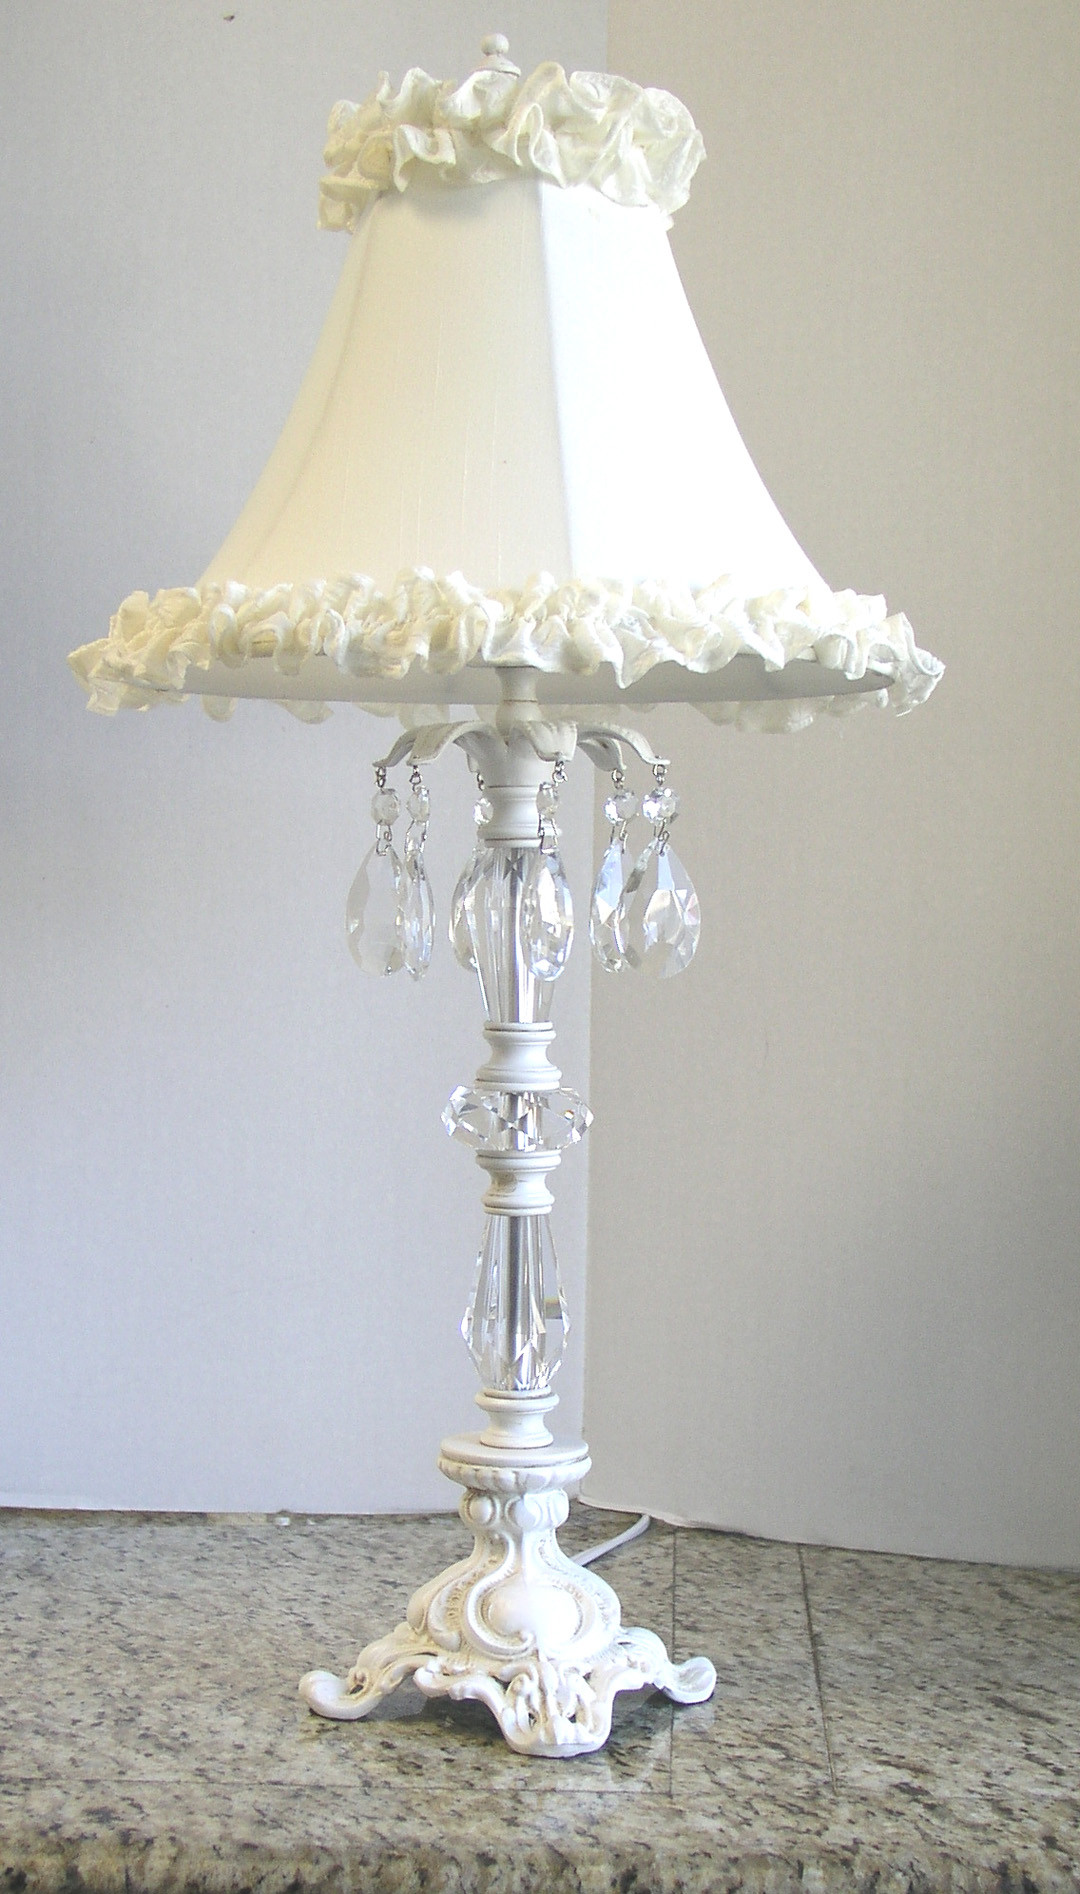 Shabby Chic Bedroom Lamps
 SHABBY CHIC LAMPS